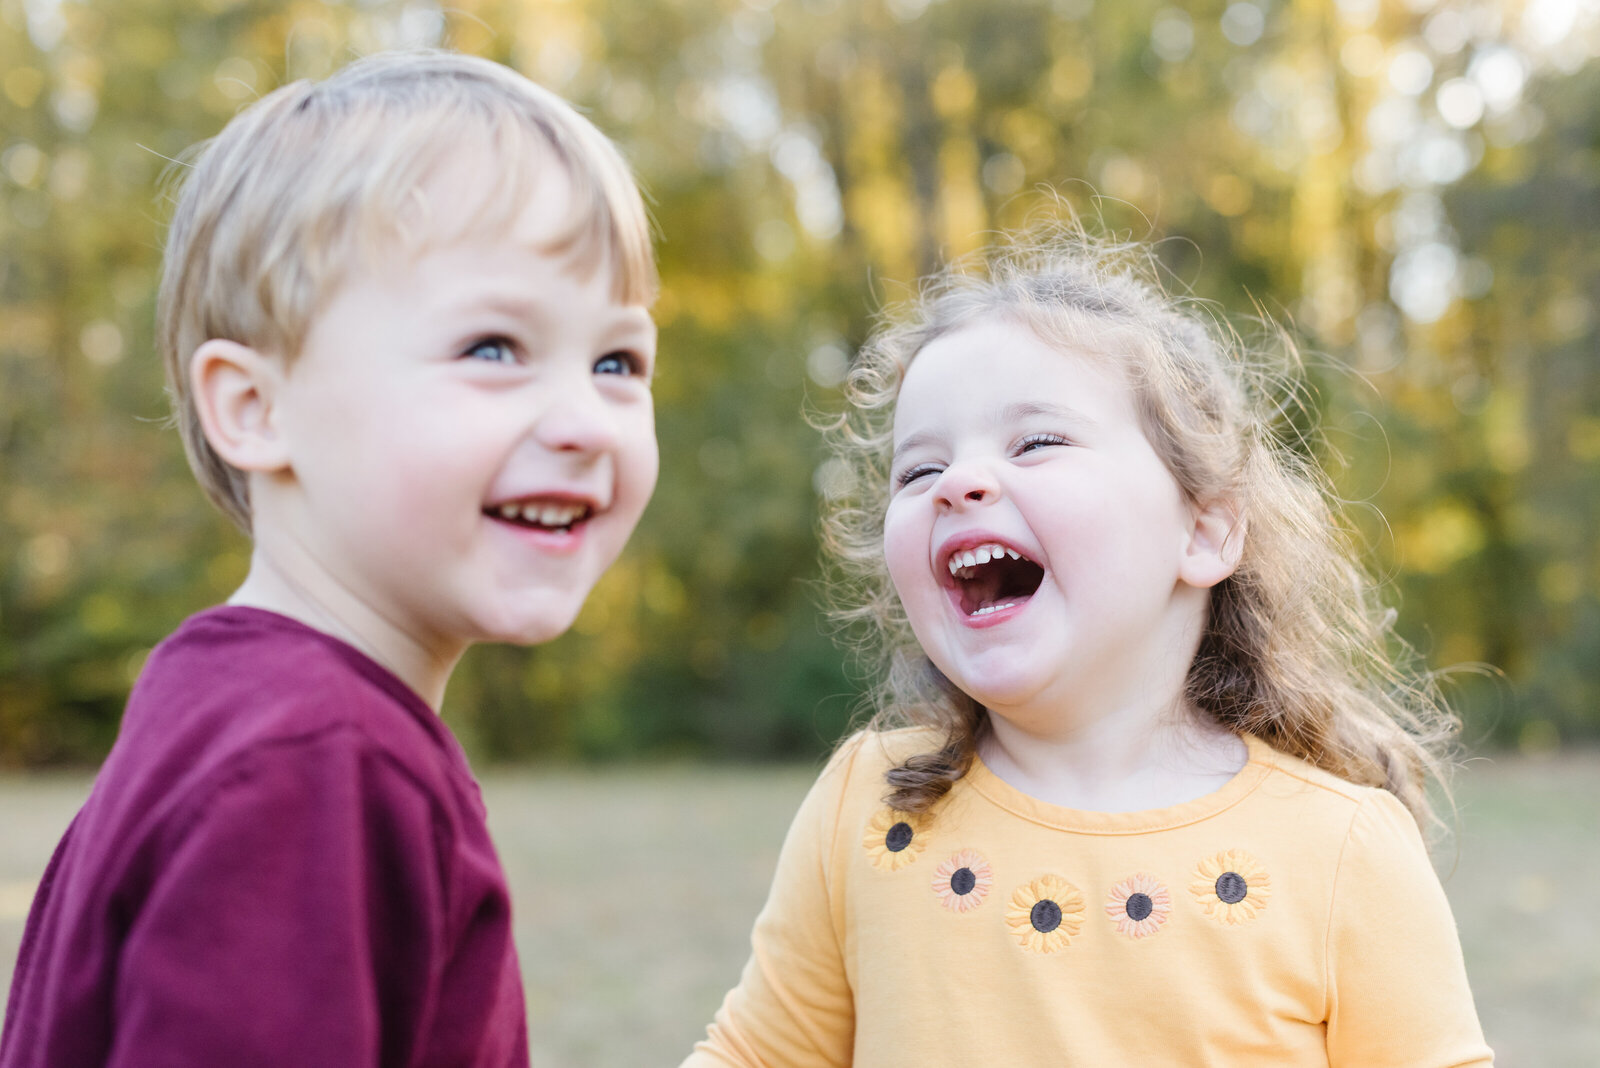 Boy in red shirt smiling with girl in yellow shirt laughing nearby - Virginia Family Photographer